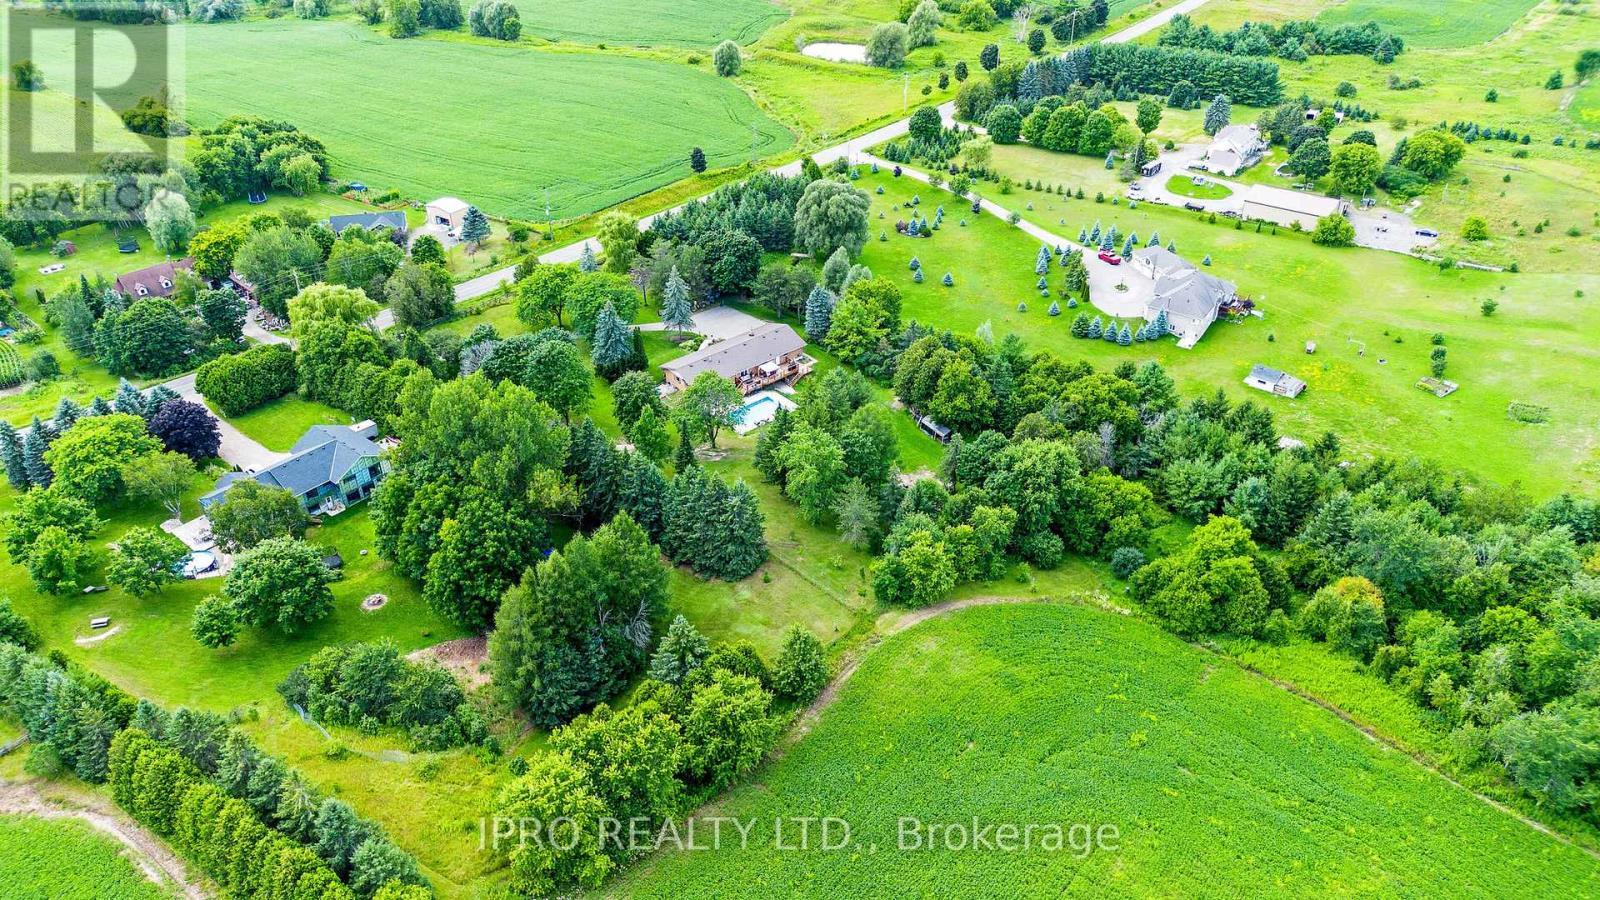 












19997 WILLOUGHBY RD

,
Caledon,




Ontario
L7K1W1

